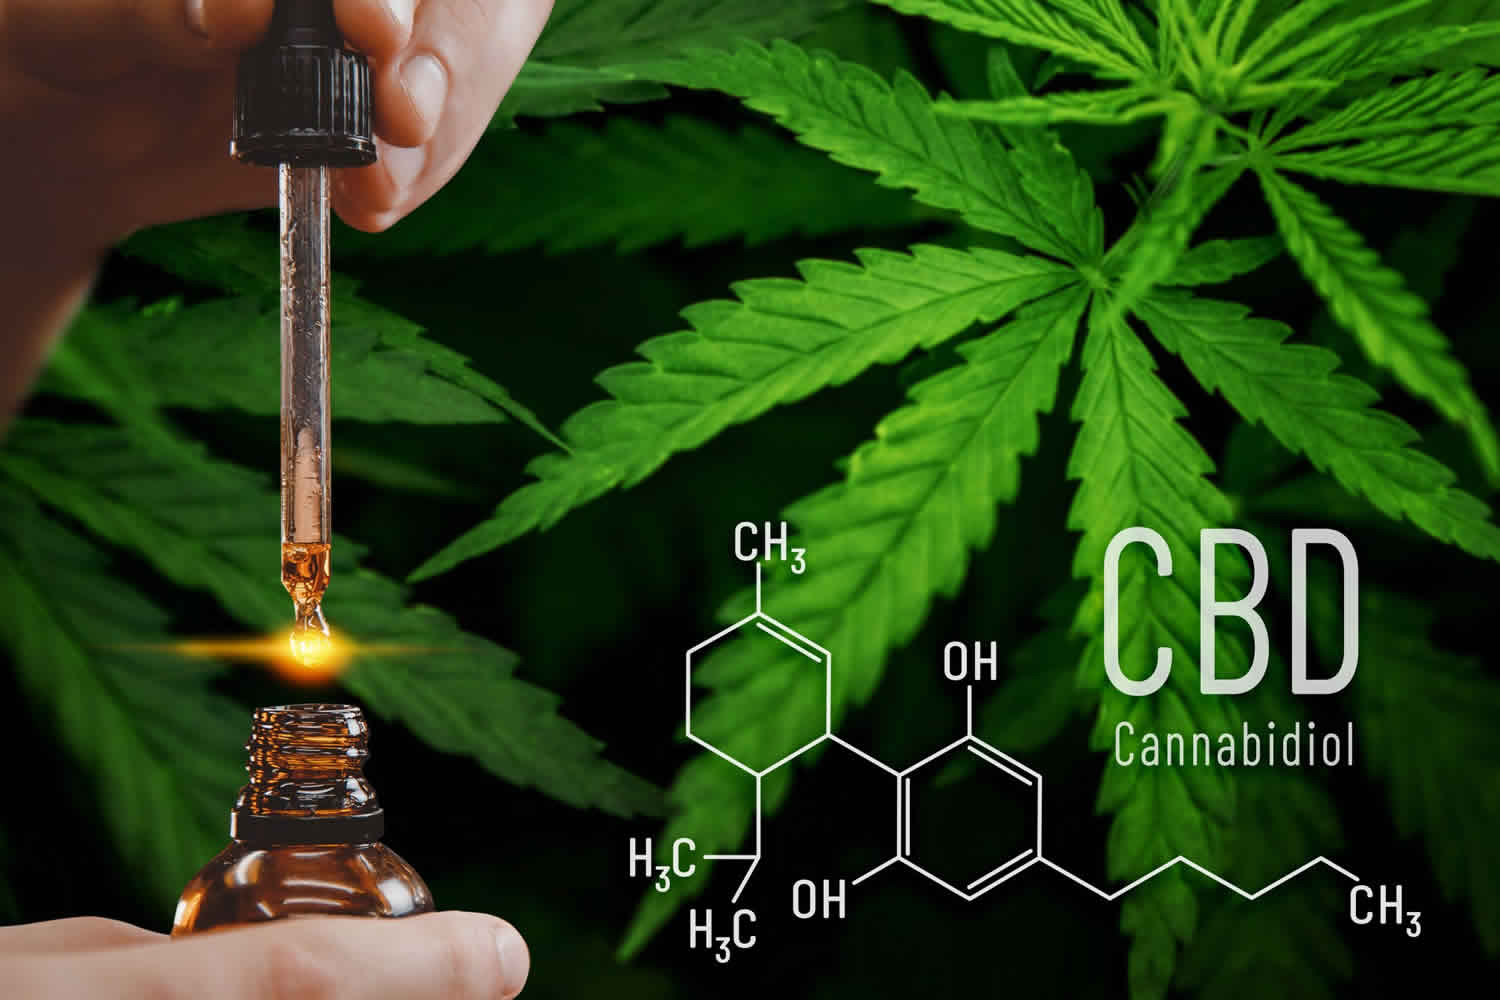 Cannabidiol function, uses, safety, side effects &amp; dosage